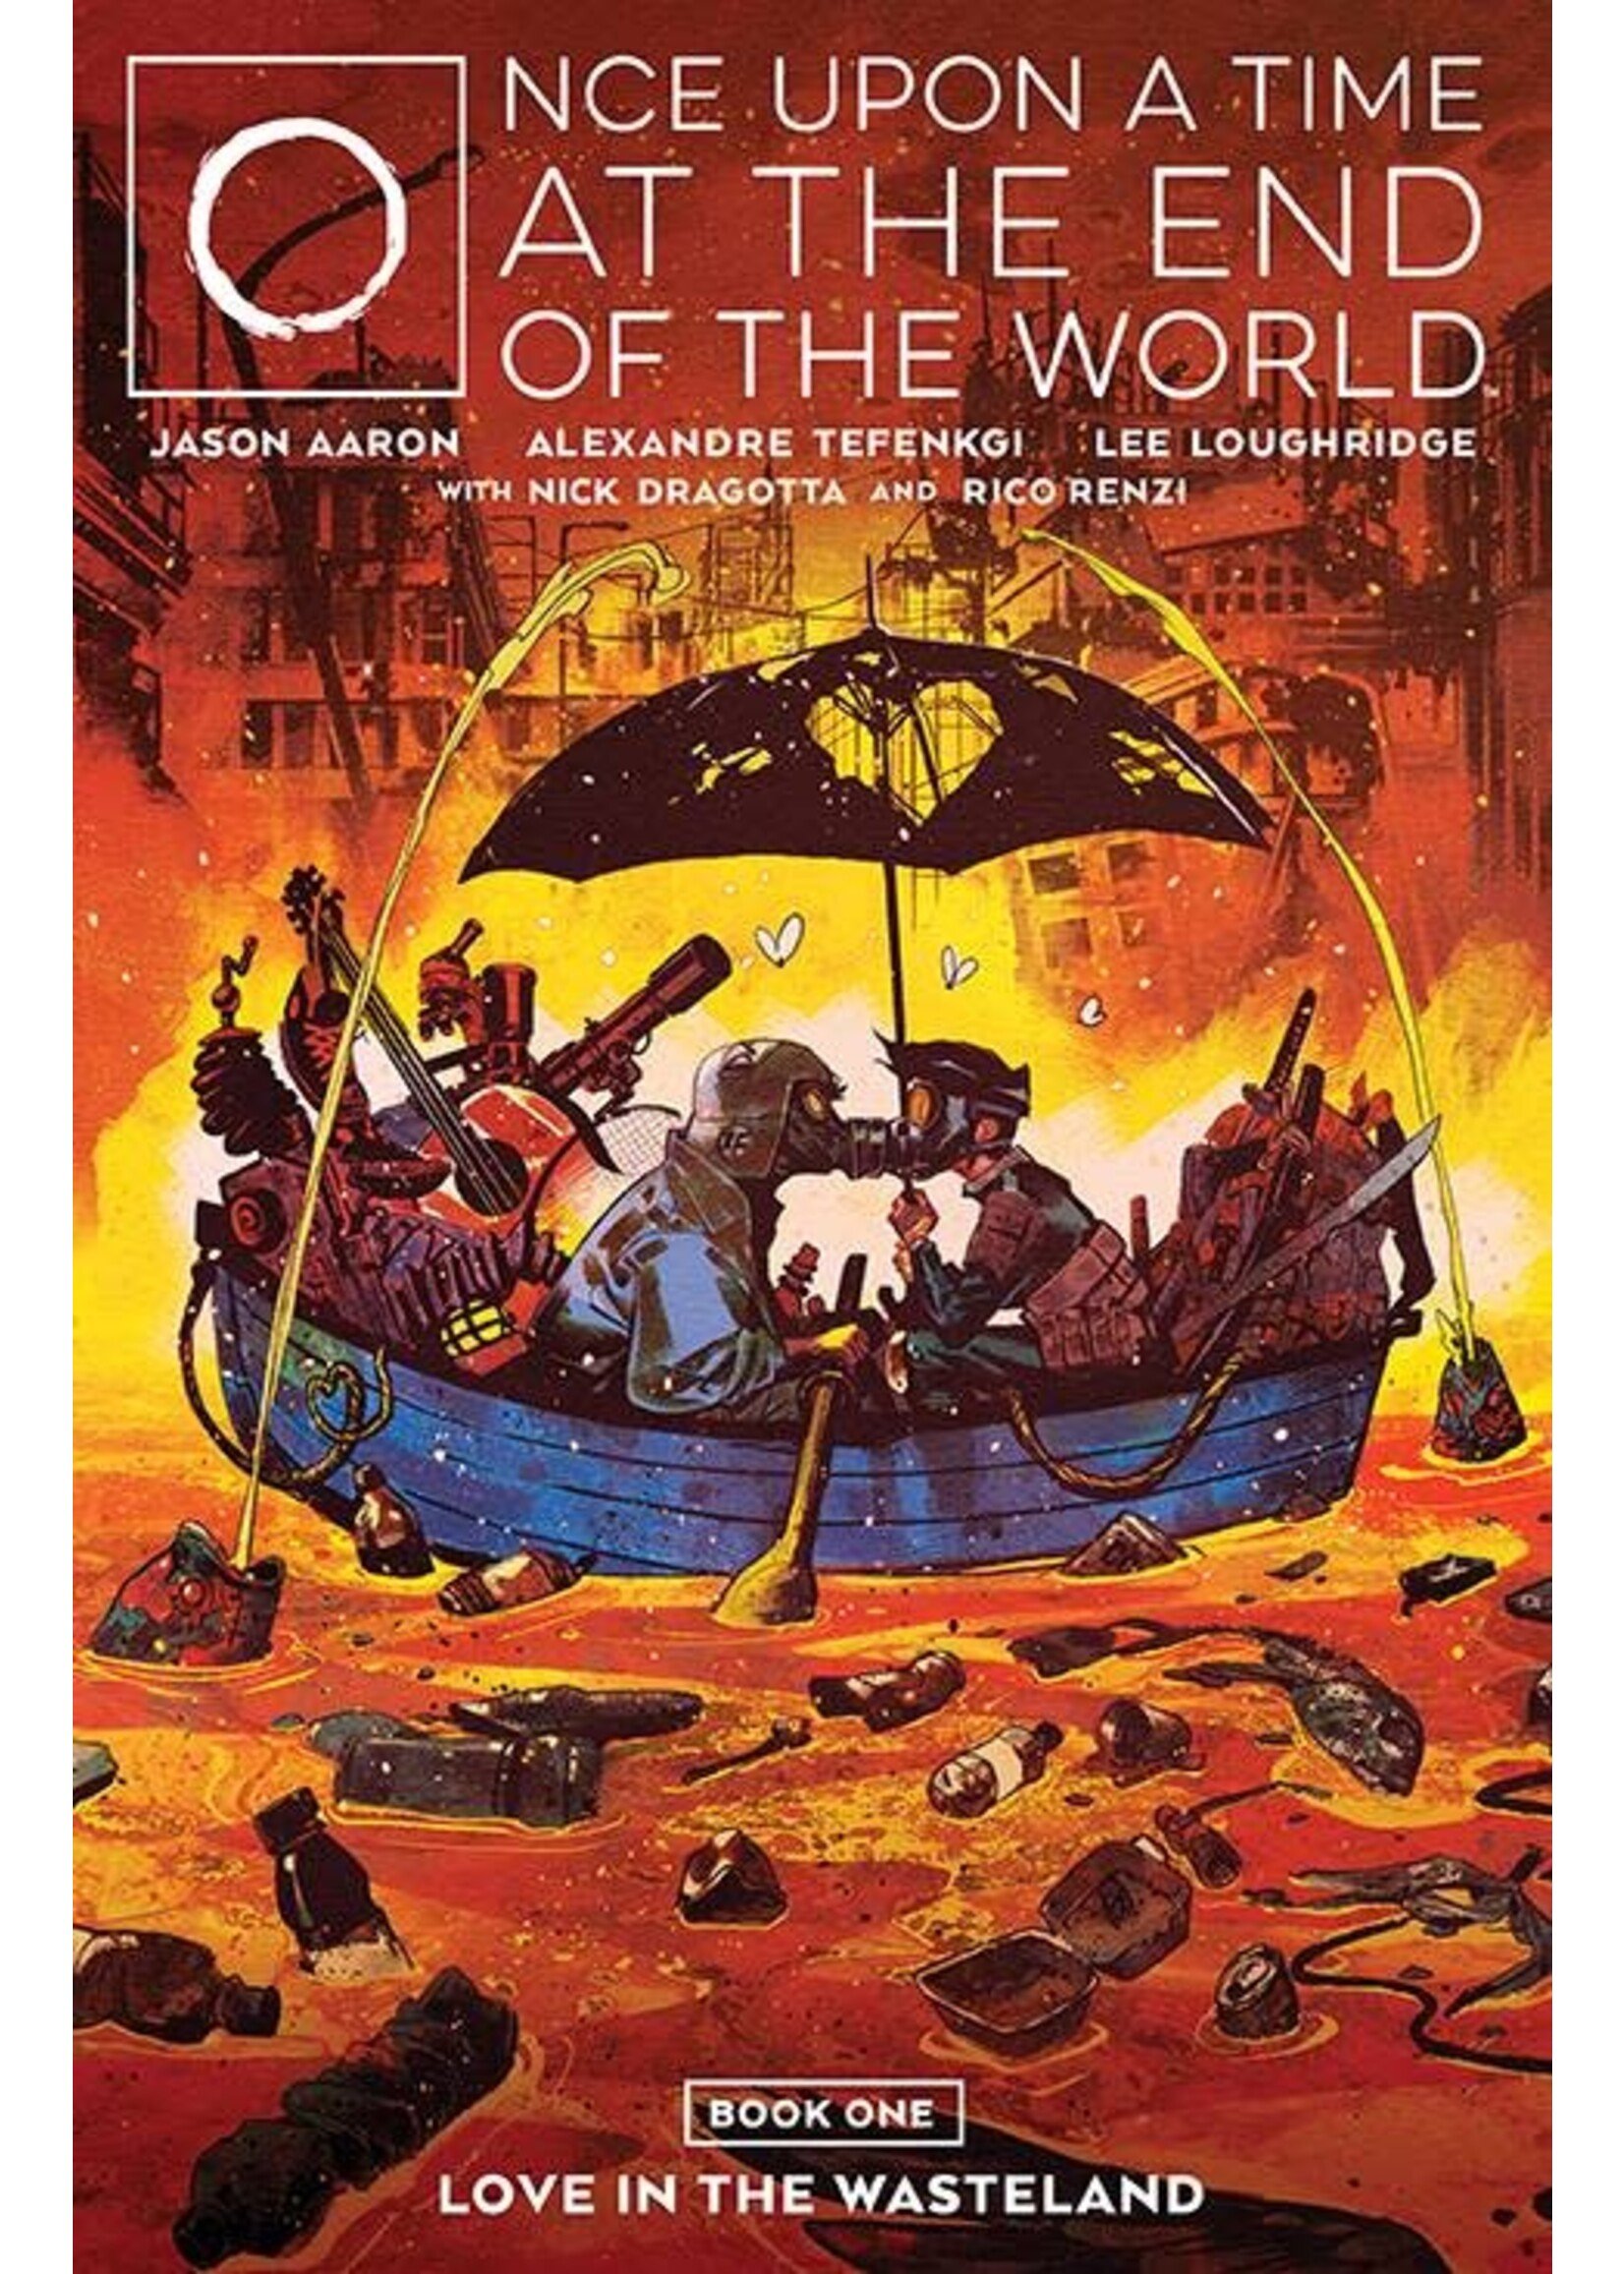 BOOM! STUDIOS ONCE UPON A TIME AT END OF THE WORLD TP VOL 01 (MR)